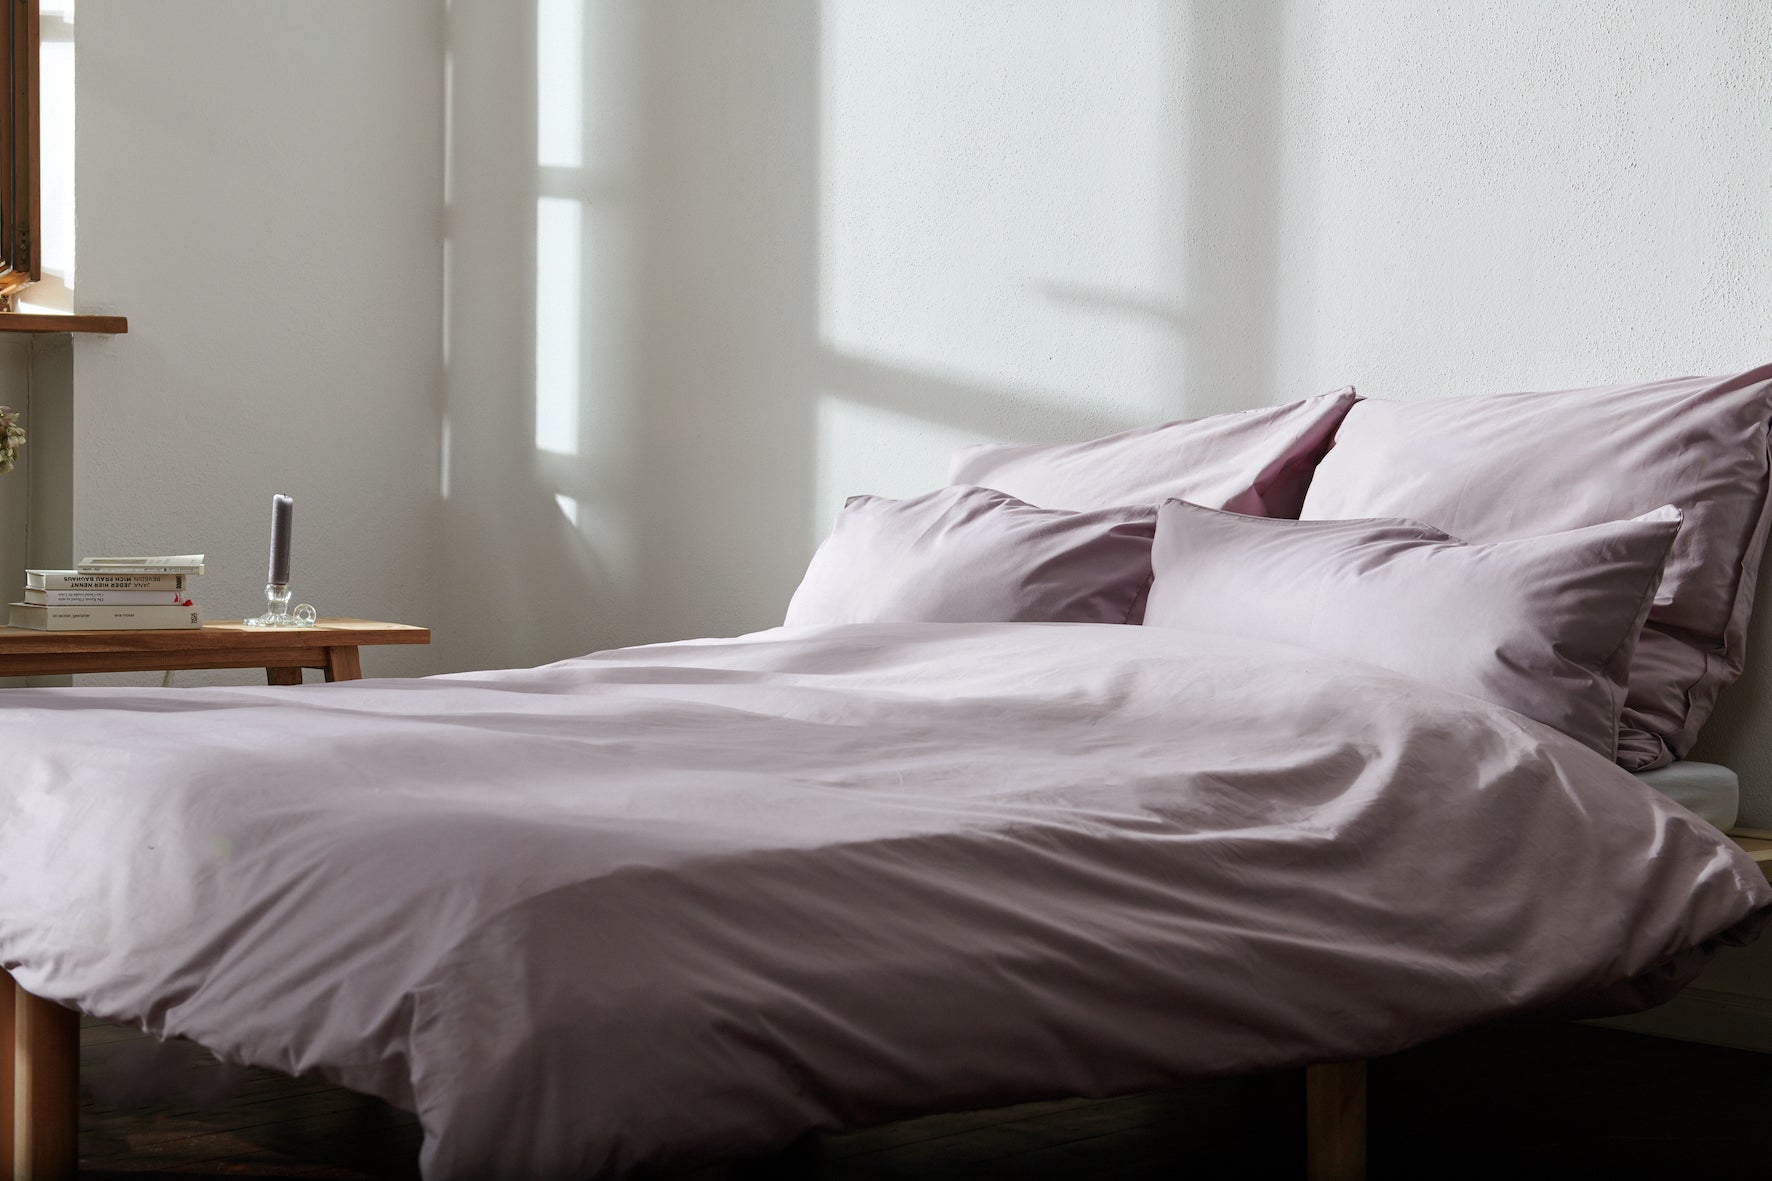 Percale Pillowcase / Muted Mauve